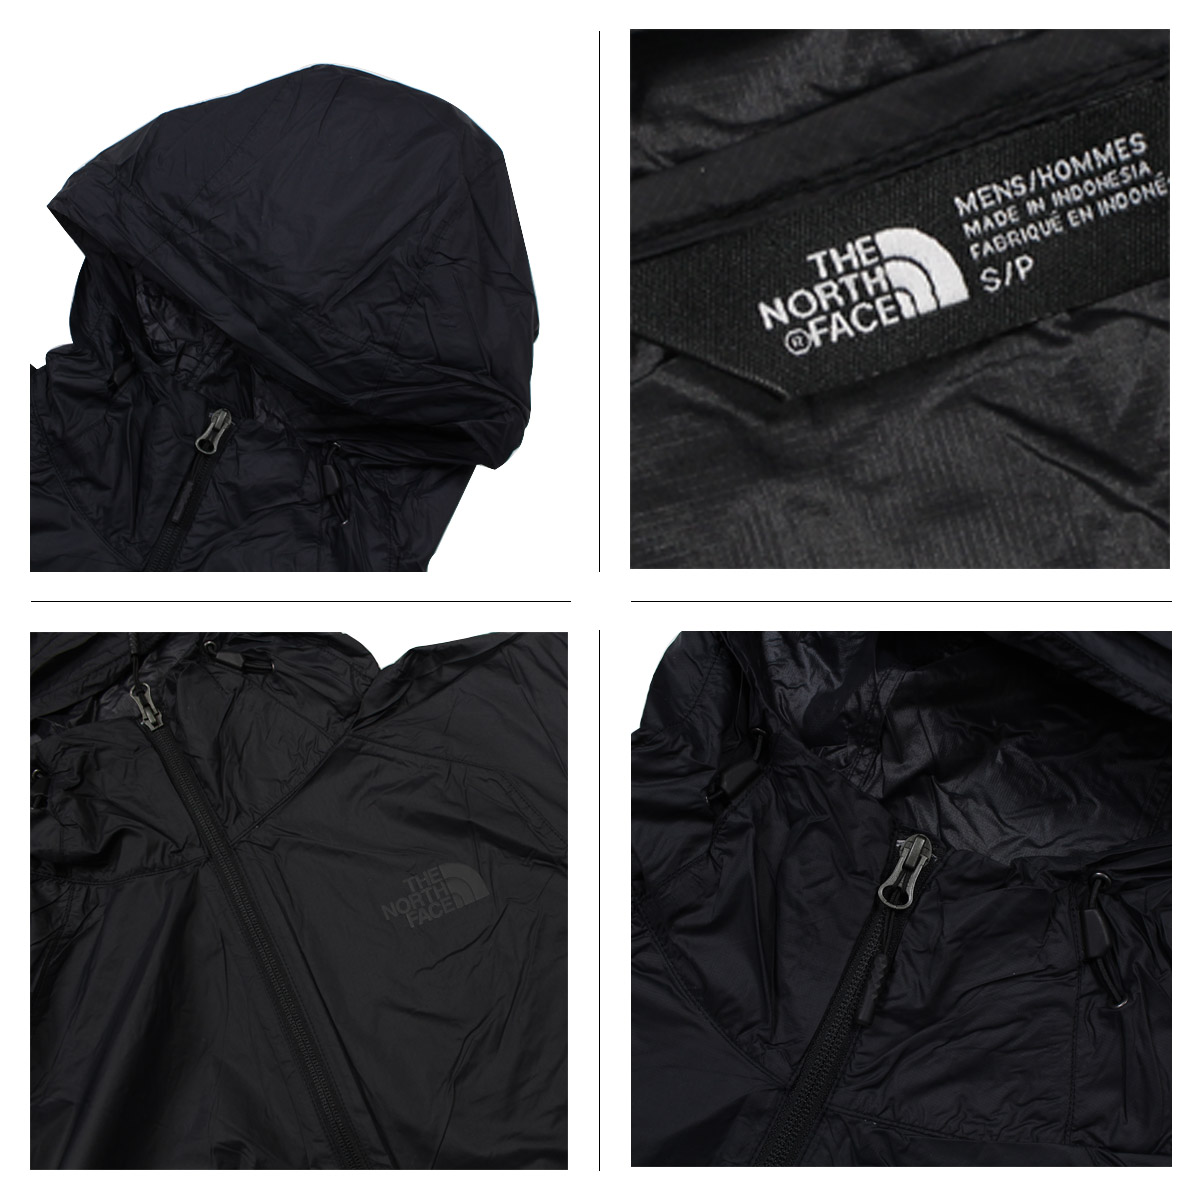 the north face mens hommes jacket